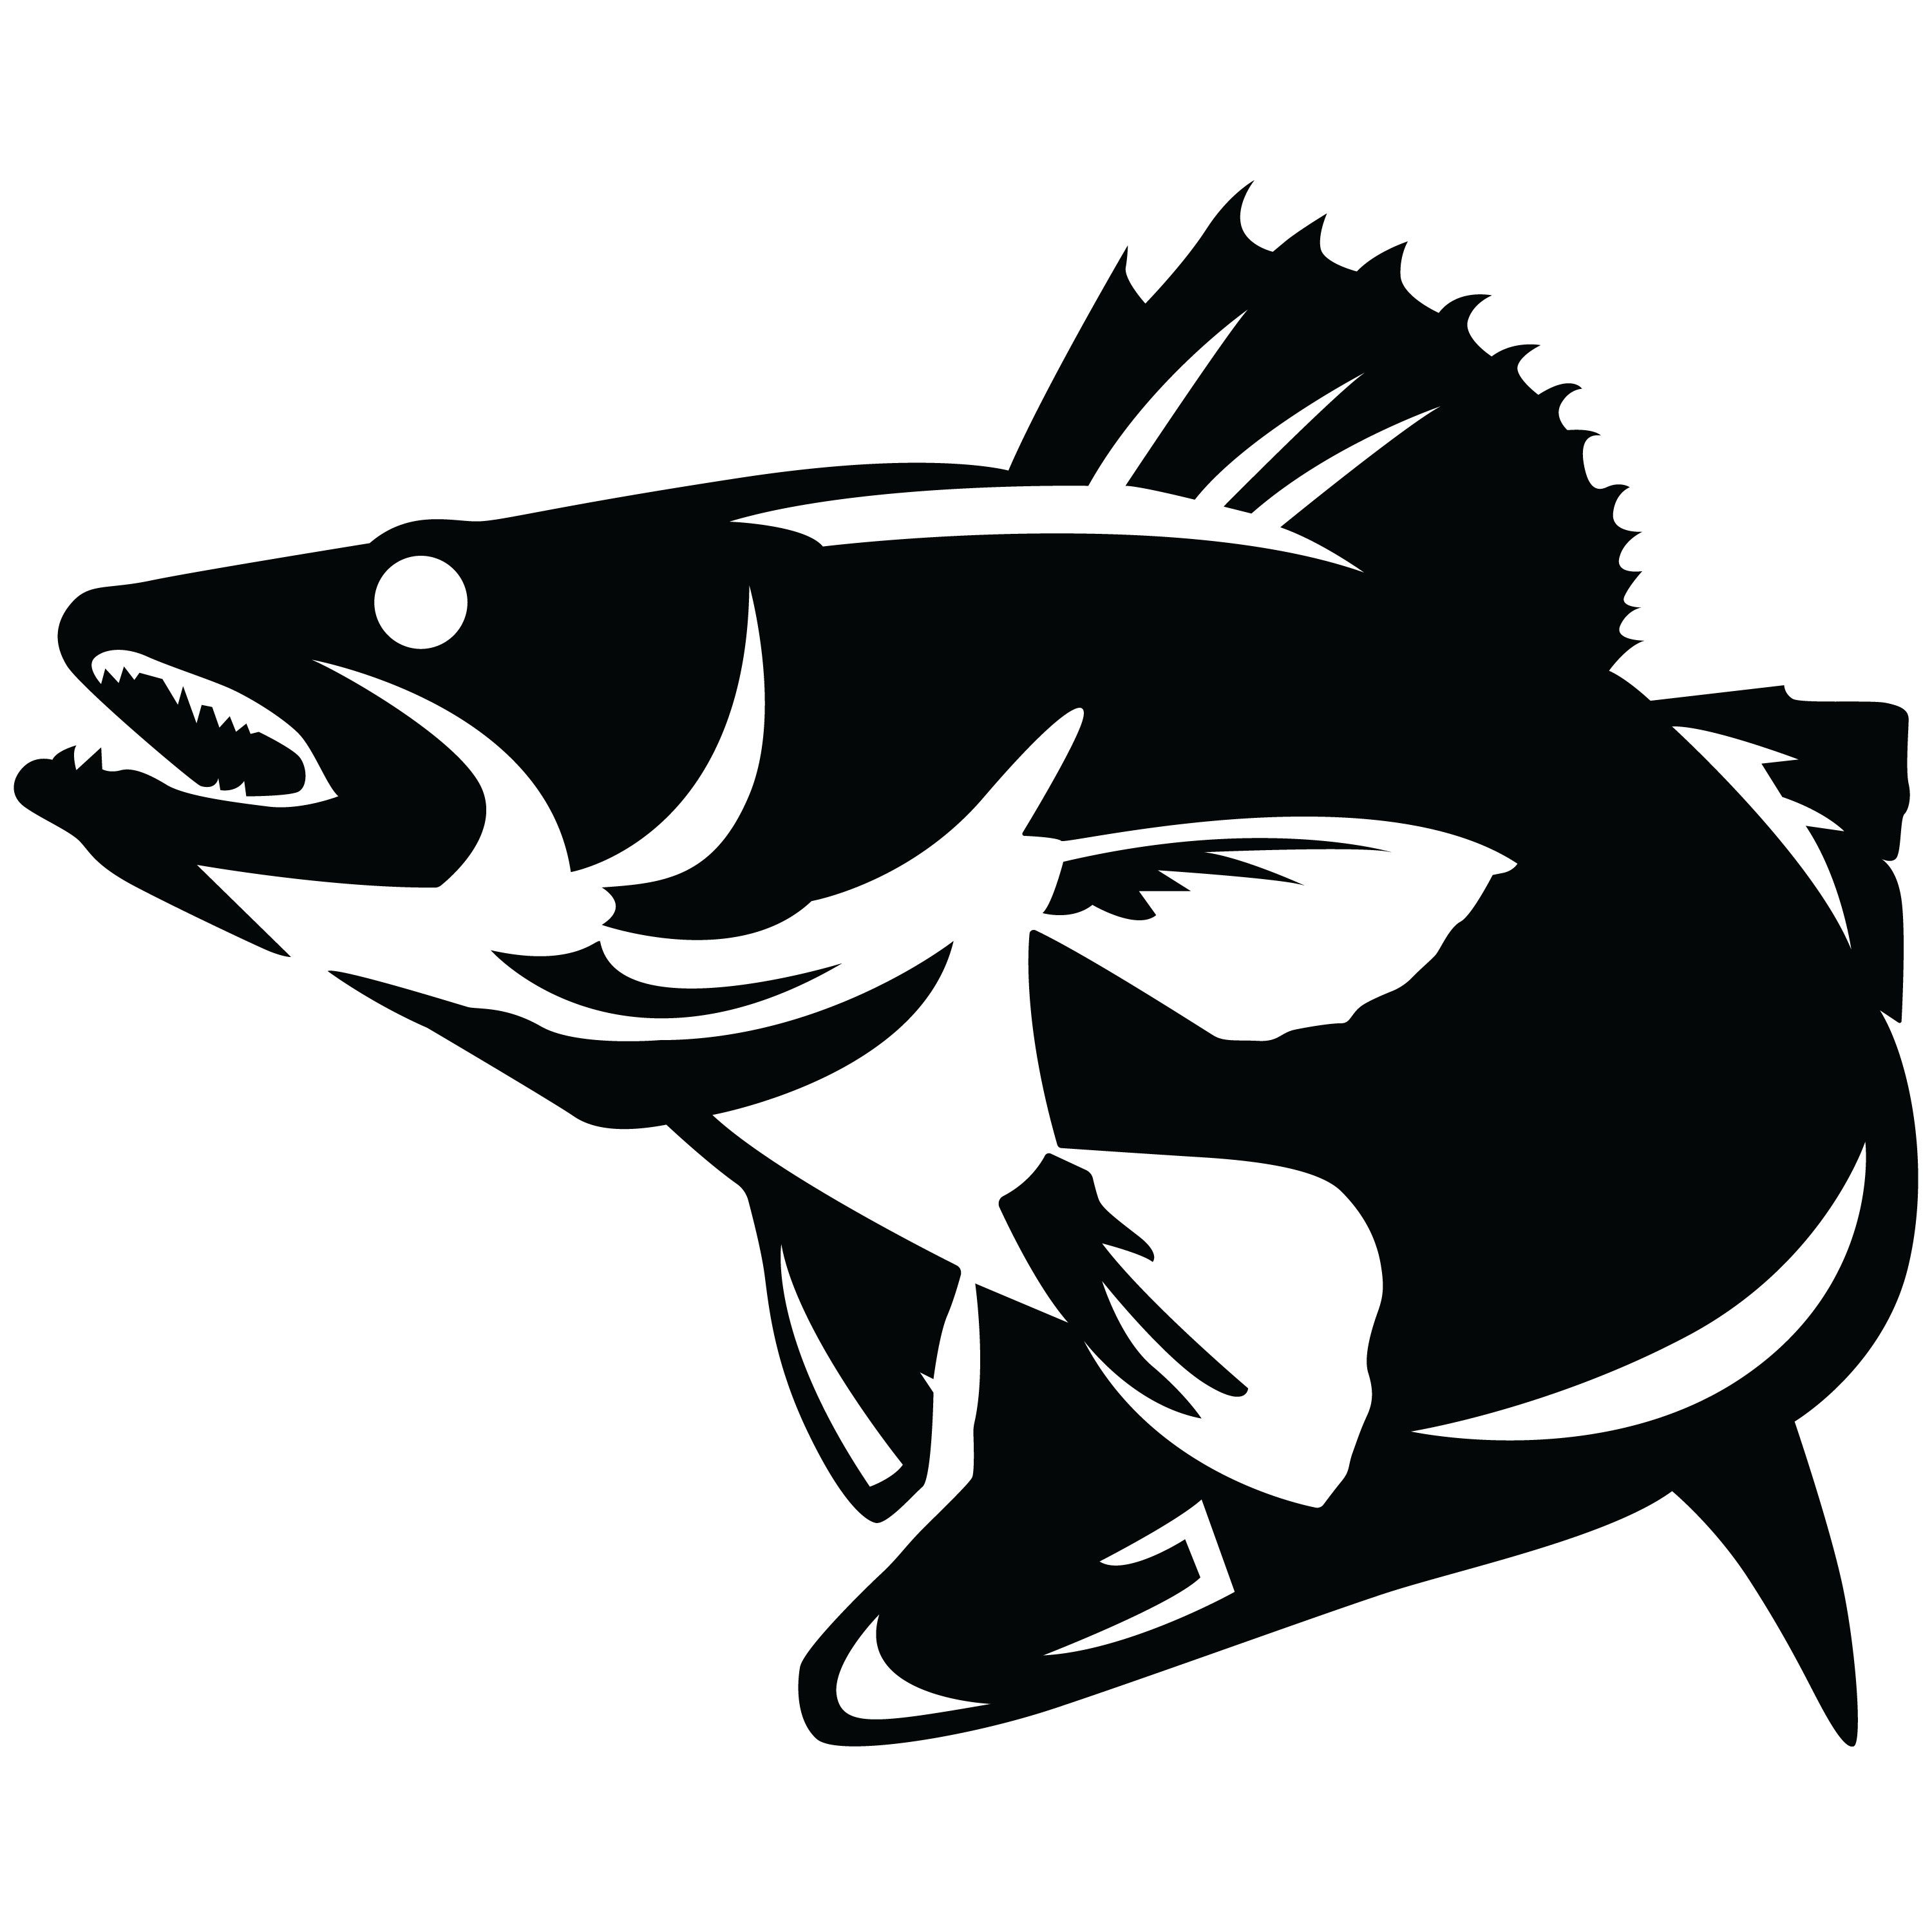 Bass clipart walleye. Image result for fishing